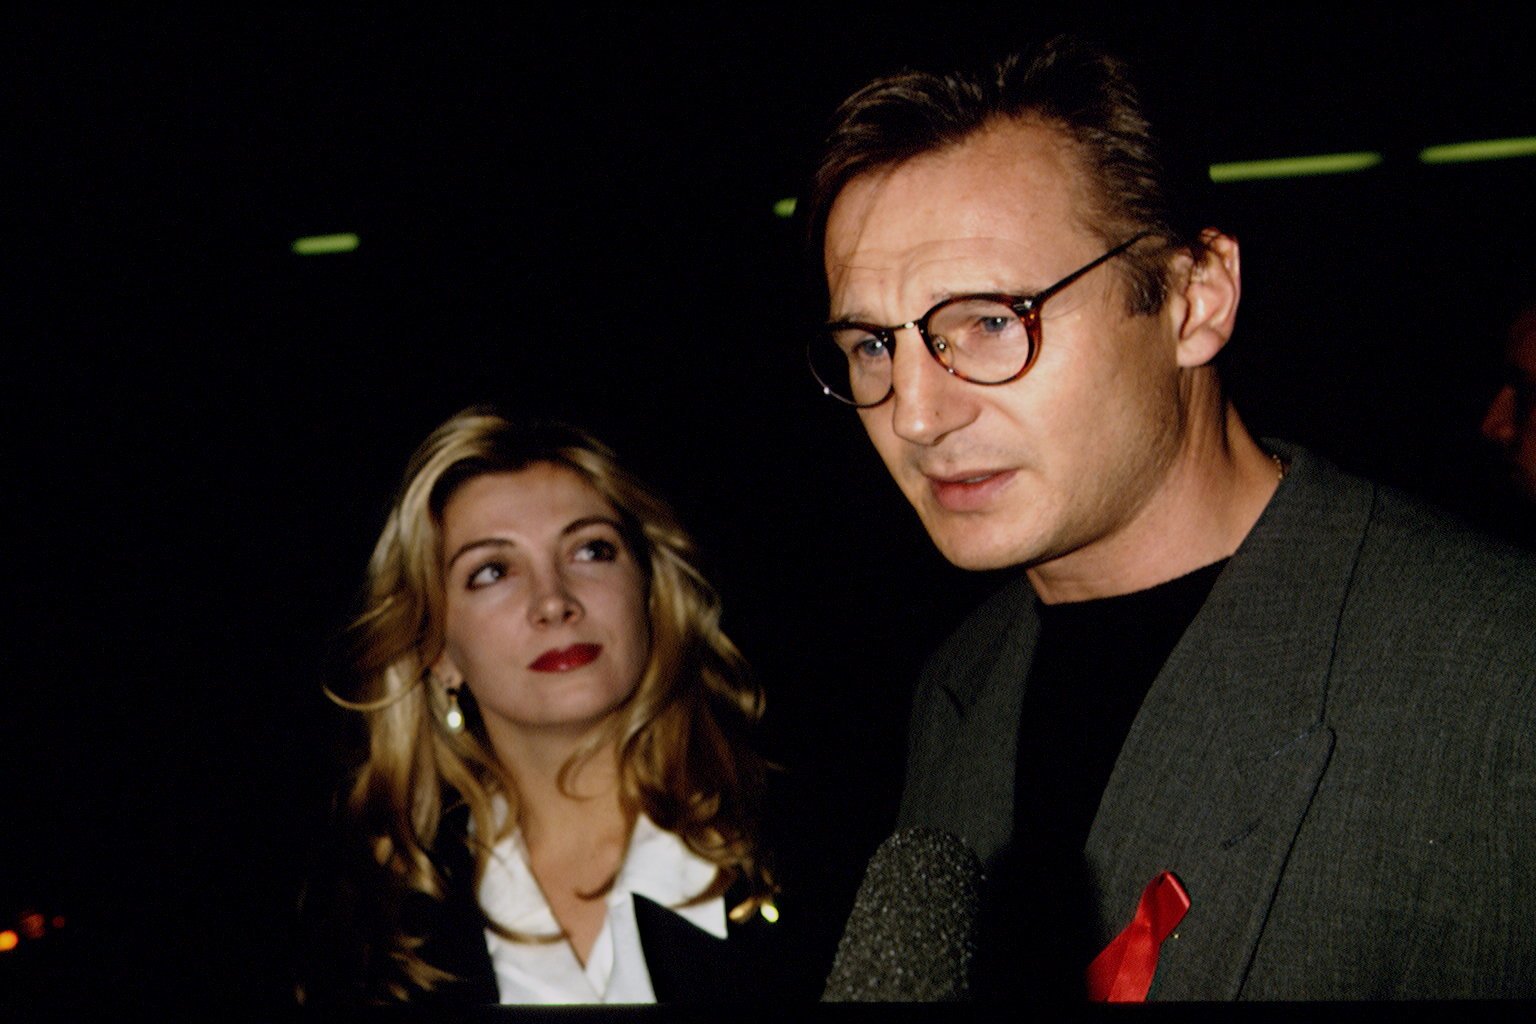 Liam Neeson and his wife the Natasha Richardson at the film premiere of "Schindler's List." / Source: Getty Images